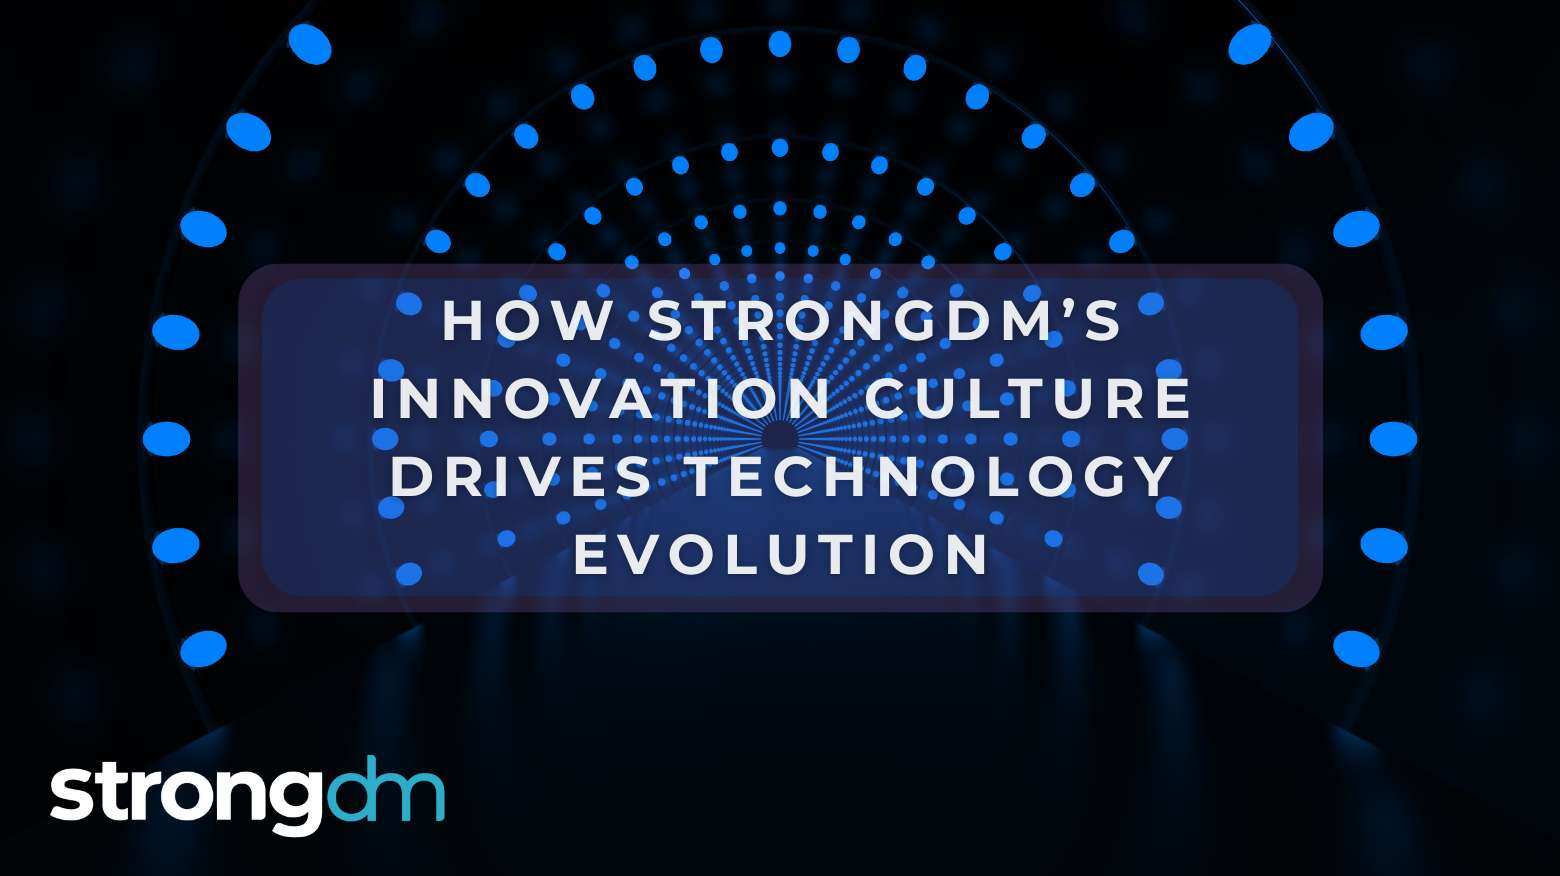 How an Innovation Culture Drives Technology Evolution at StrongDM